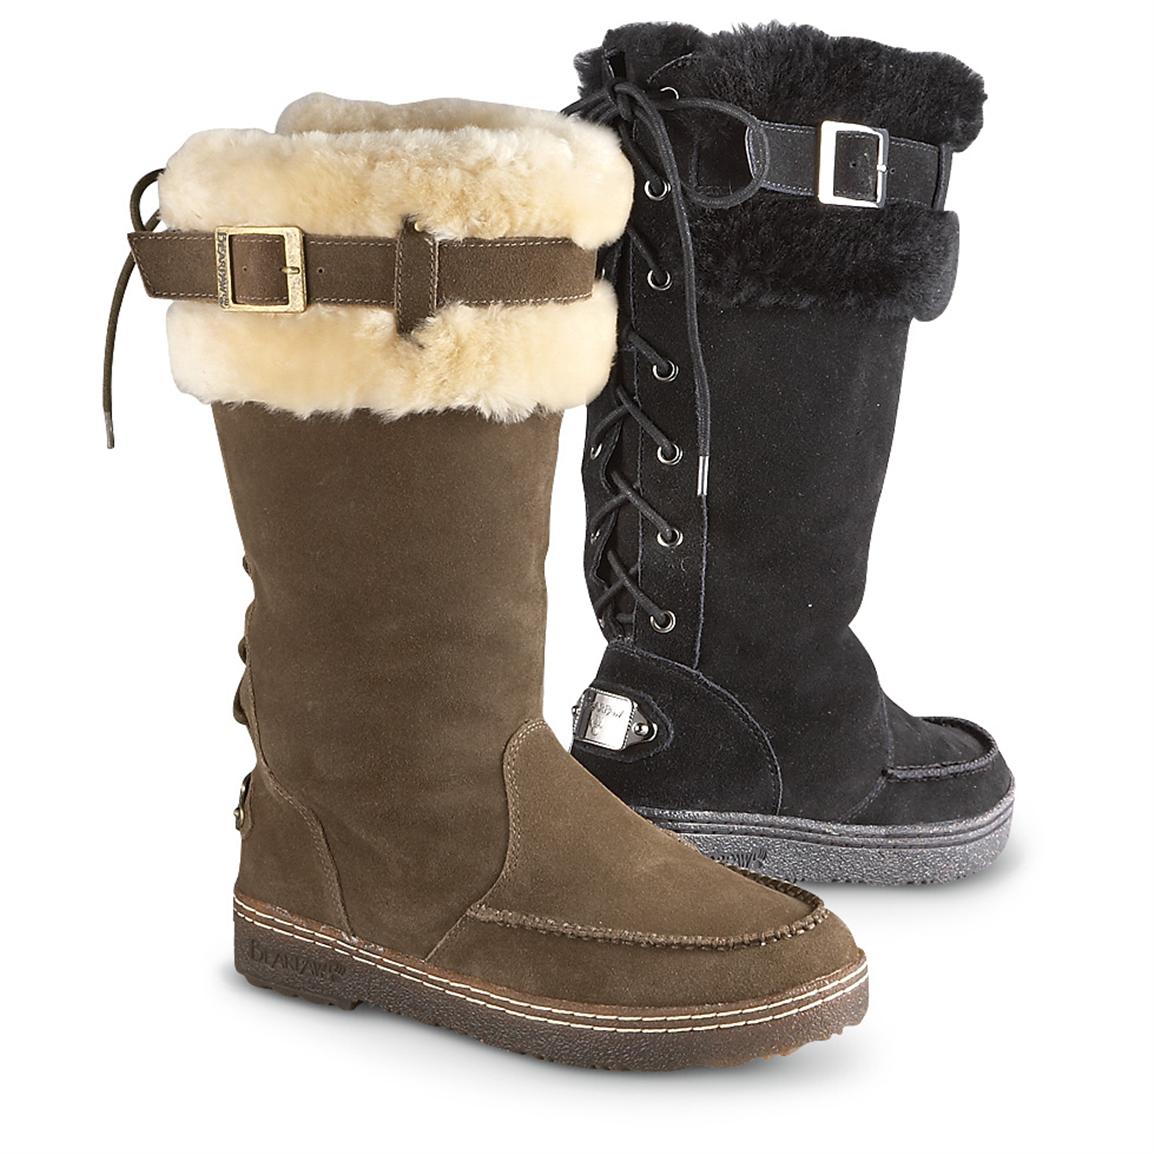 Women's BEARPAW® Siren Boots - 207234, Casual Shoes at Sportsman's Guide